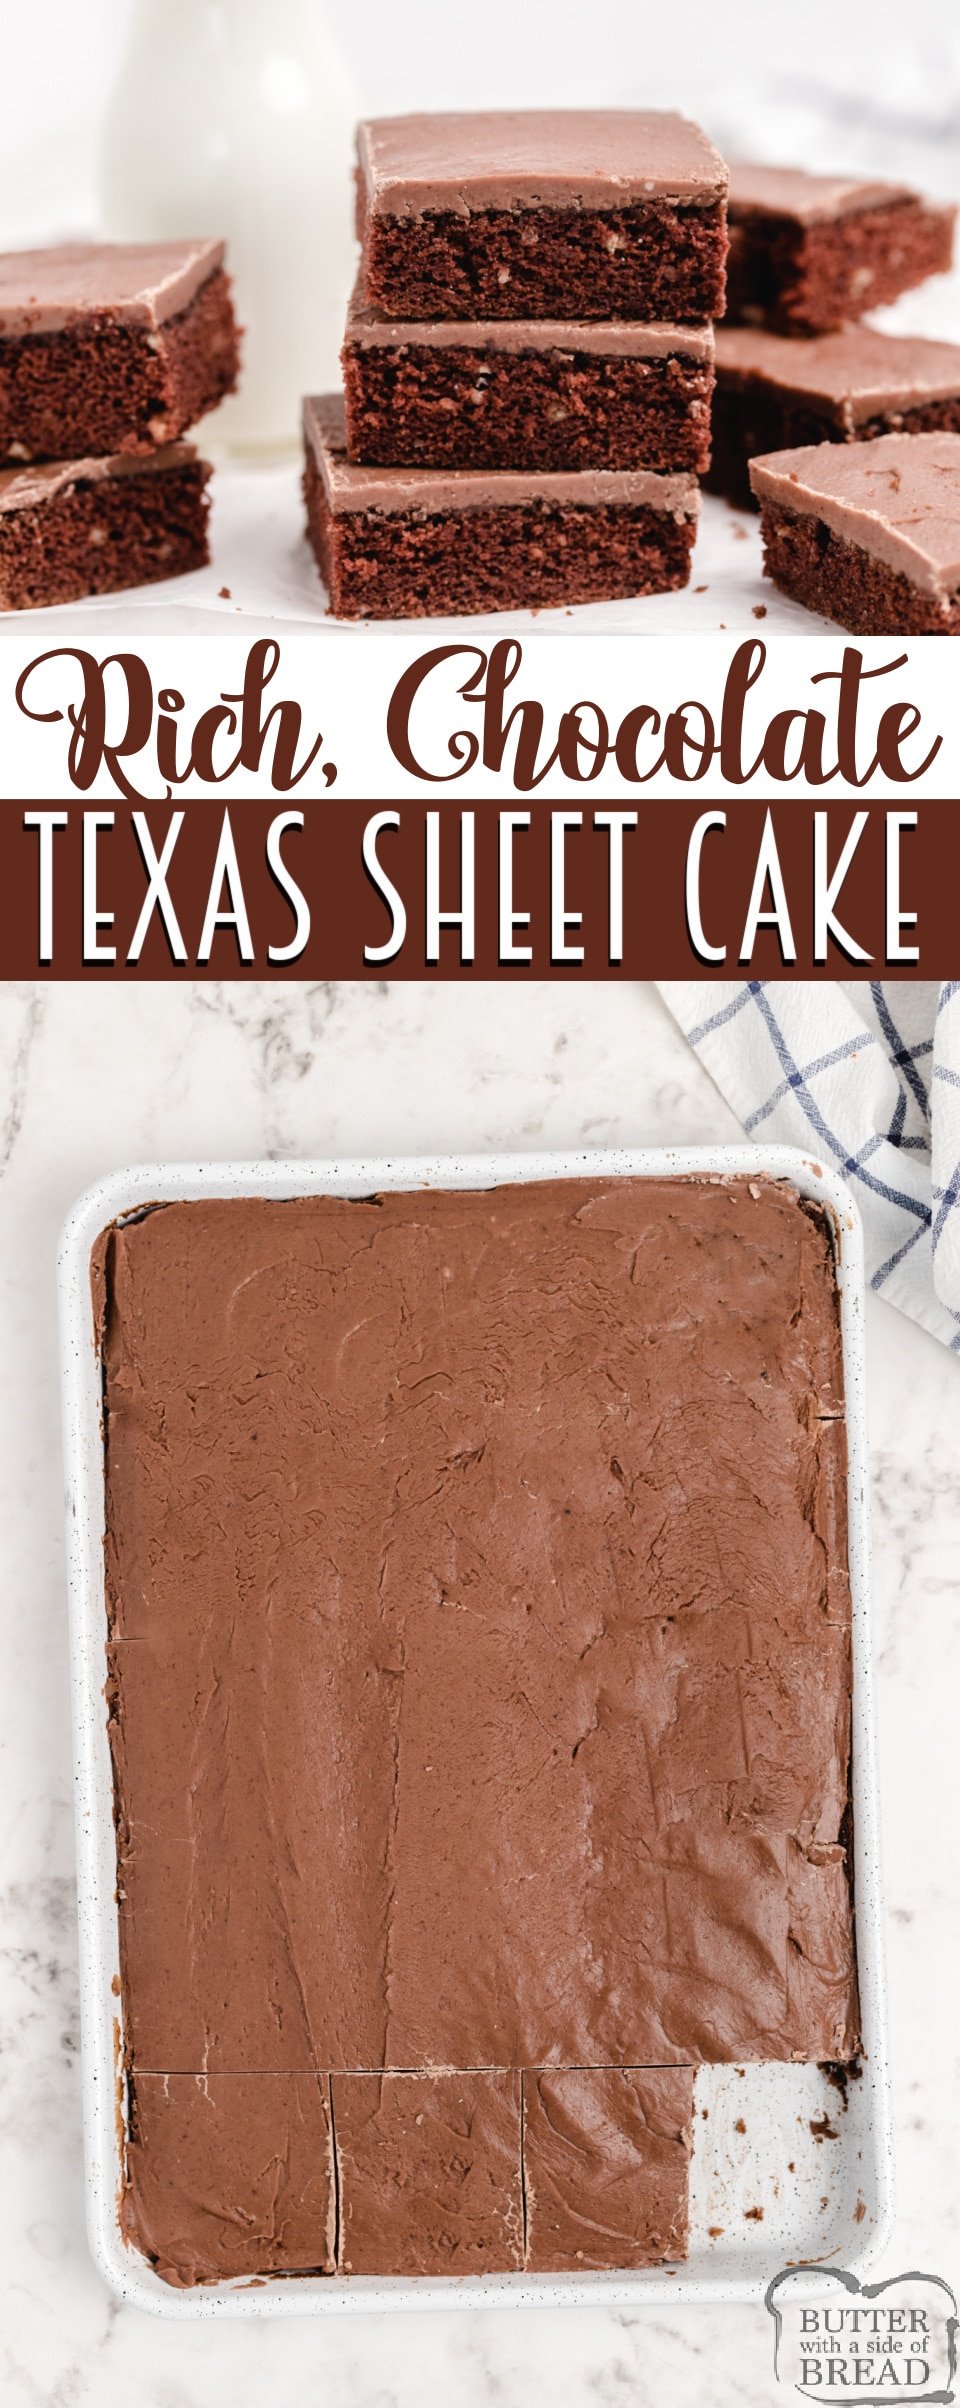 Texas Sheet Cake is the perfect chocolate cake recipe made from scratch. Delicious chocolate cake made in a jelly roll pan and topped with a warm, homemade chocolate frosting.